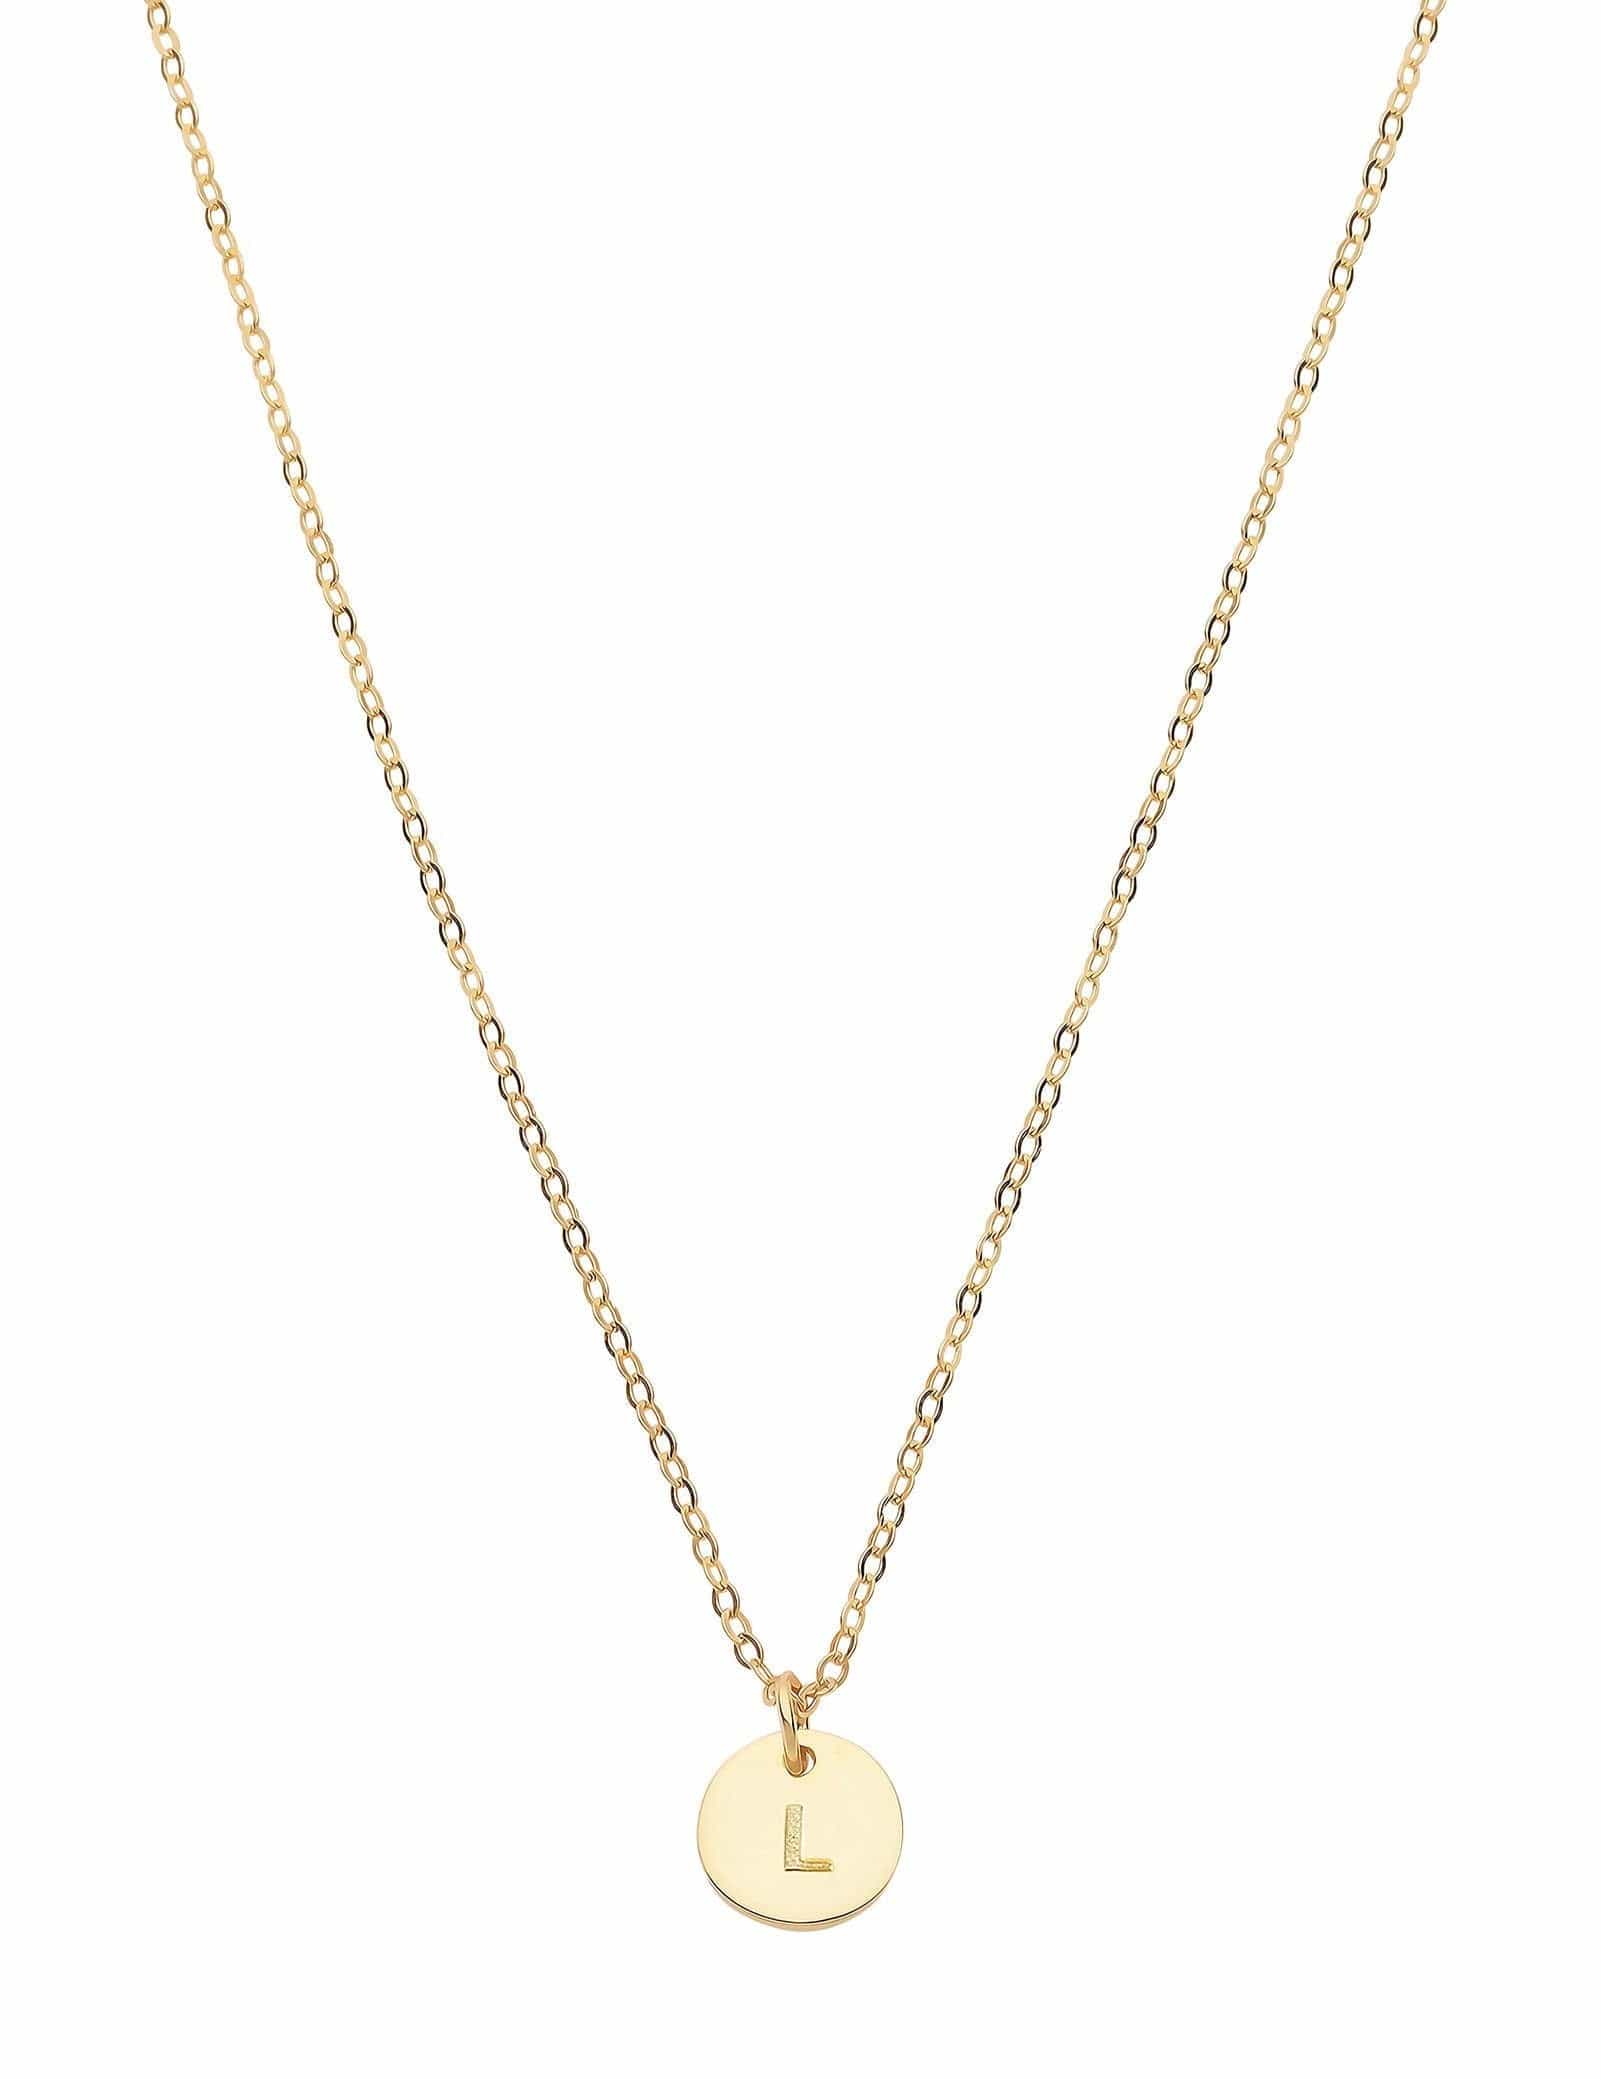 Dear Addison Yellow Gold Letter L Necklace